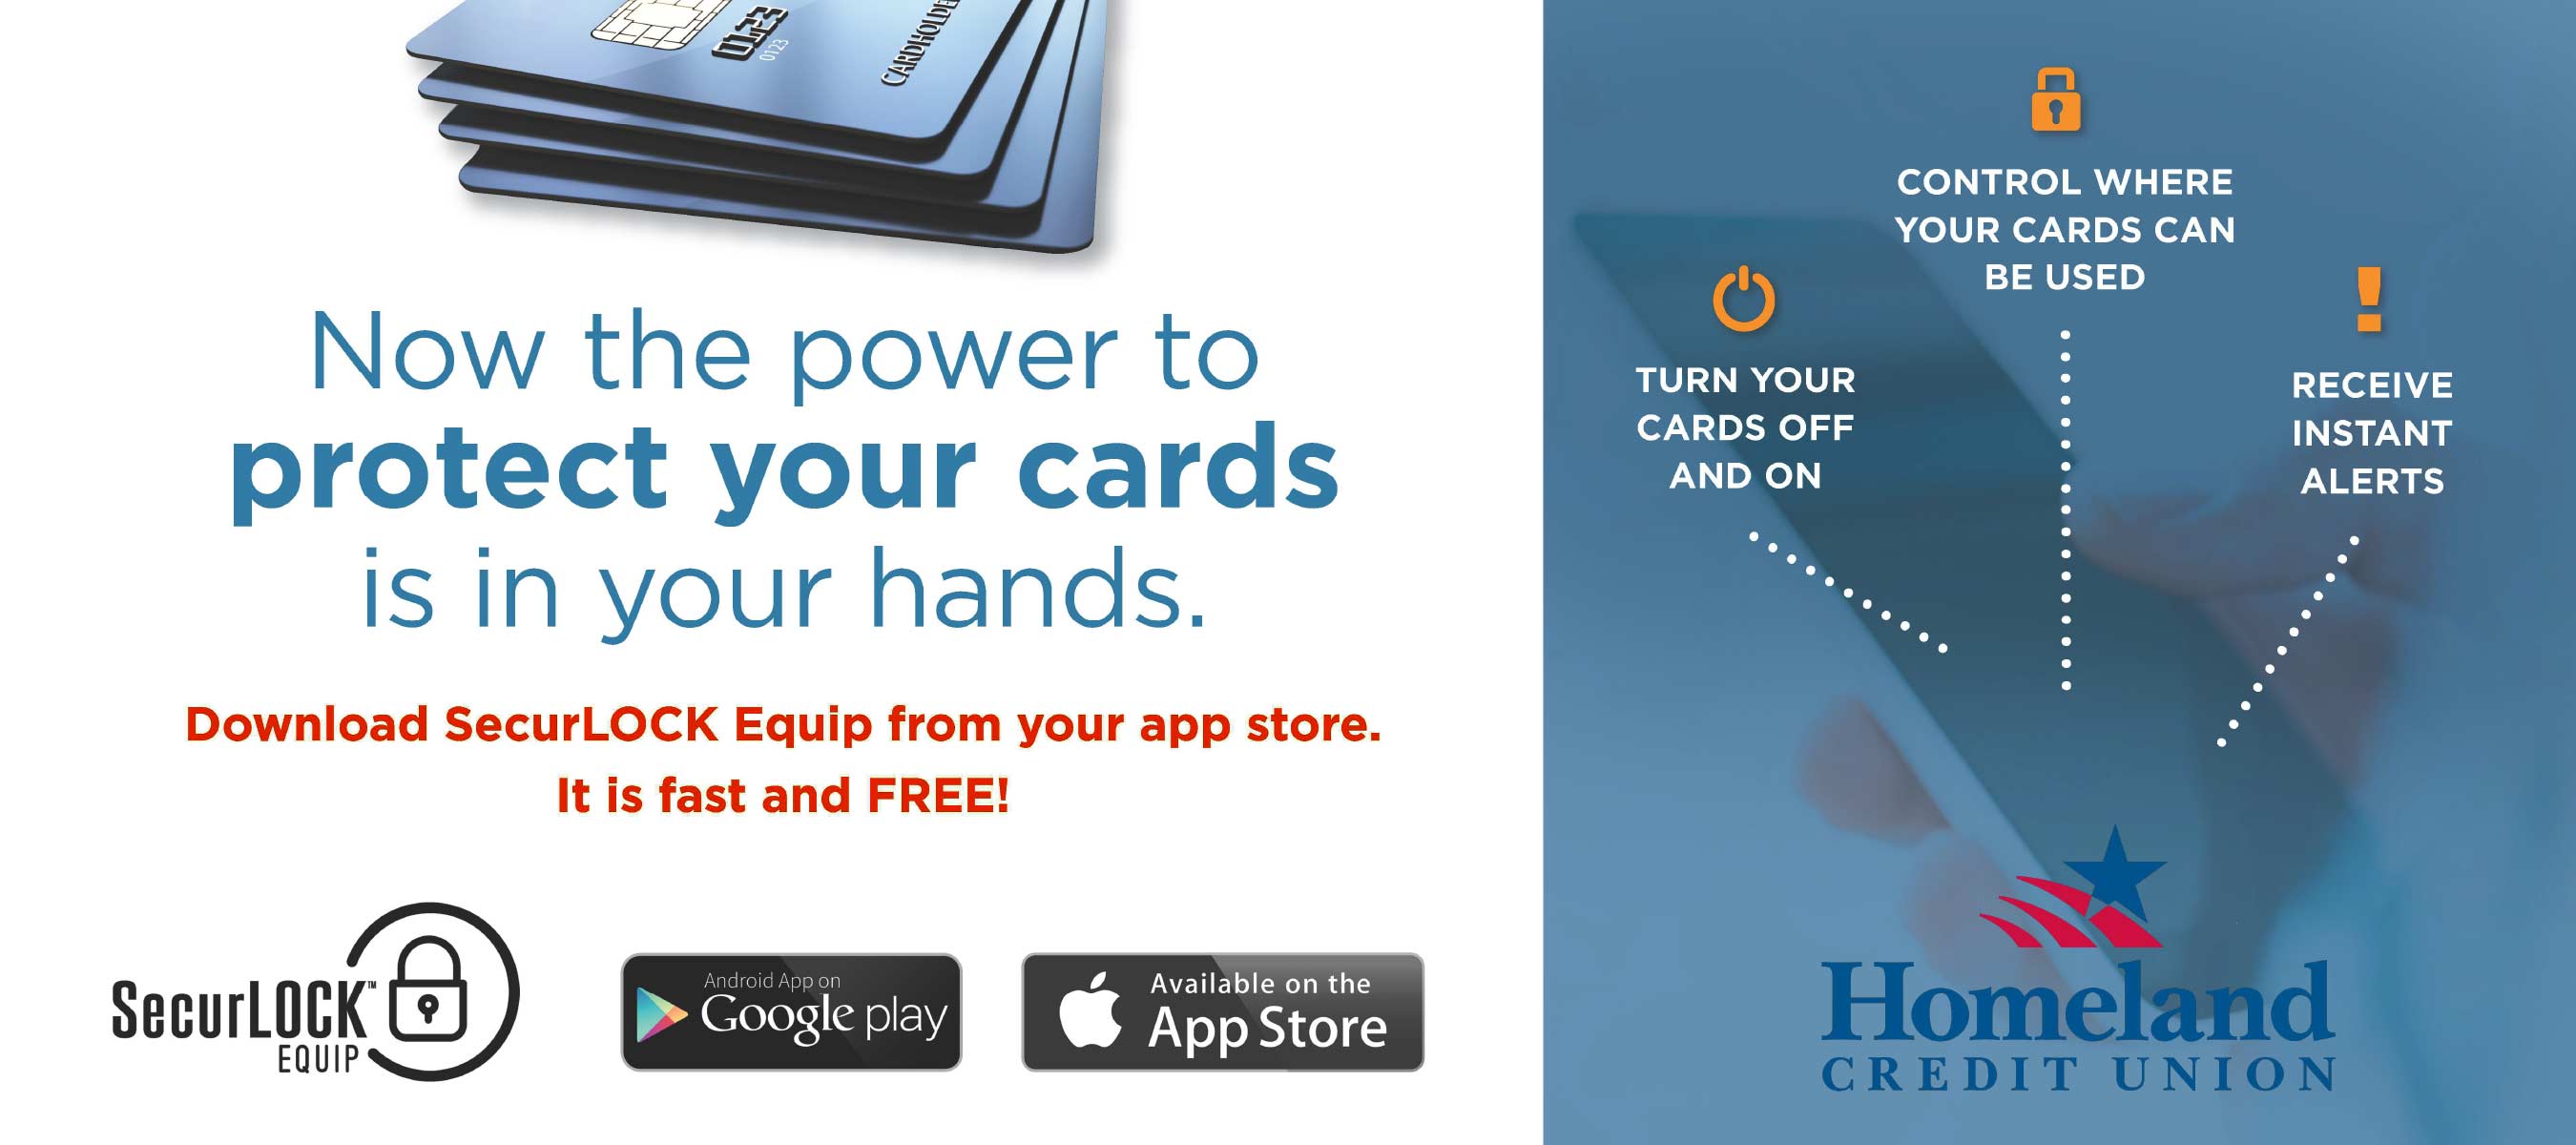 Now the power to protect your cards is in your hands. Download SecurLOCK Equip from your app store. It is fast and FREE! Turn your cards off and on. Control where your cards can be used. Receive instant alerts.